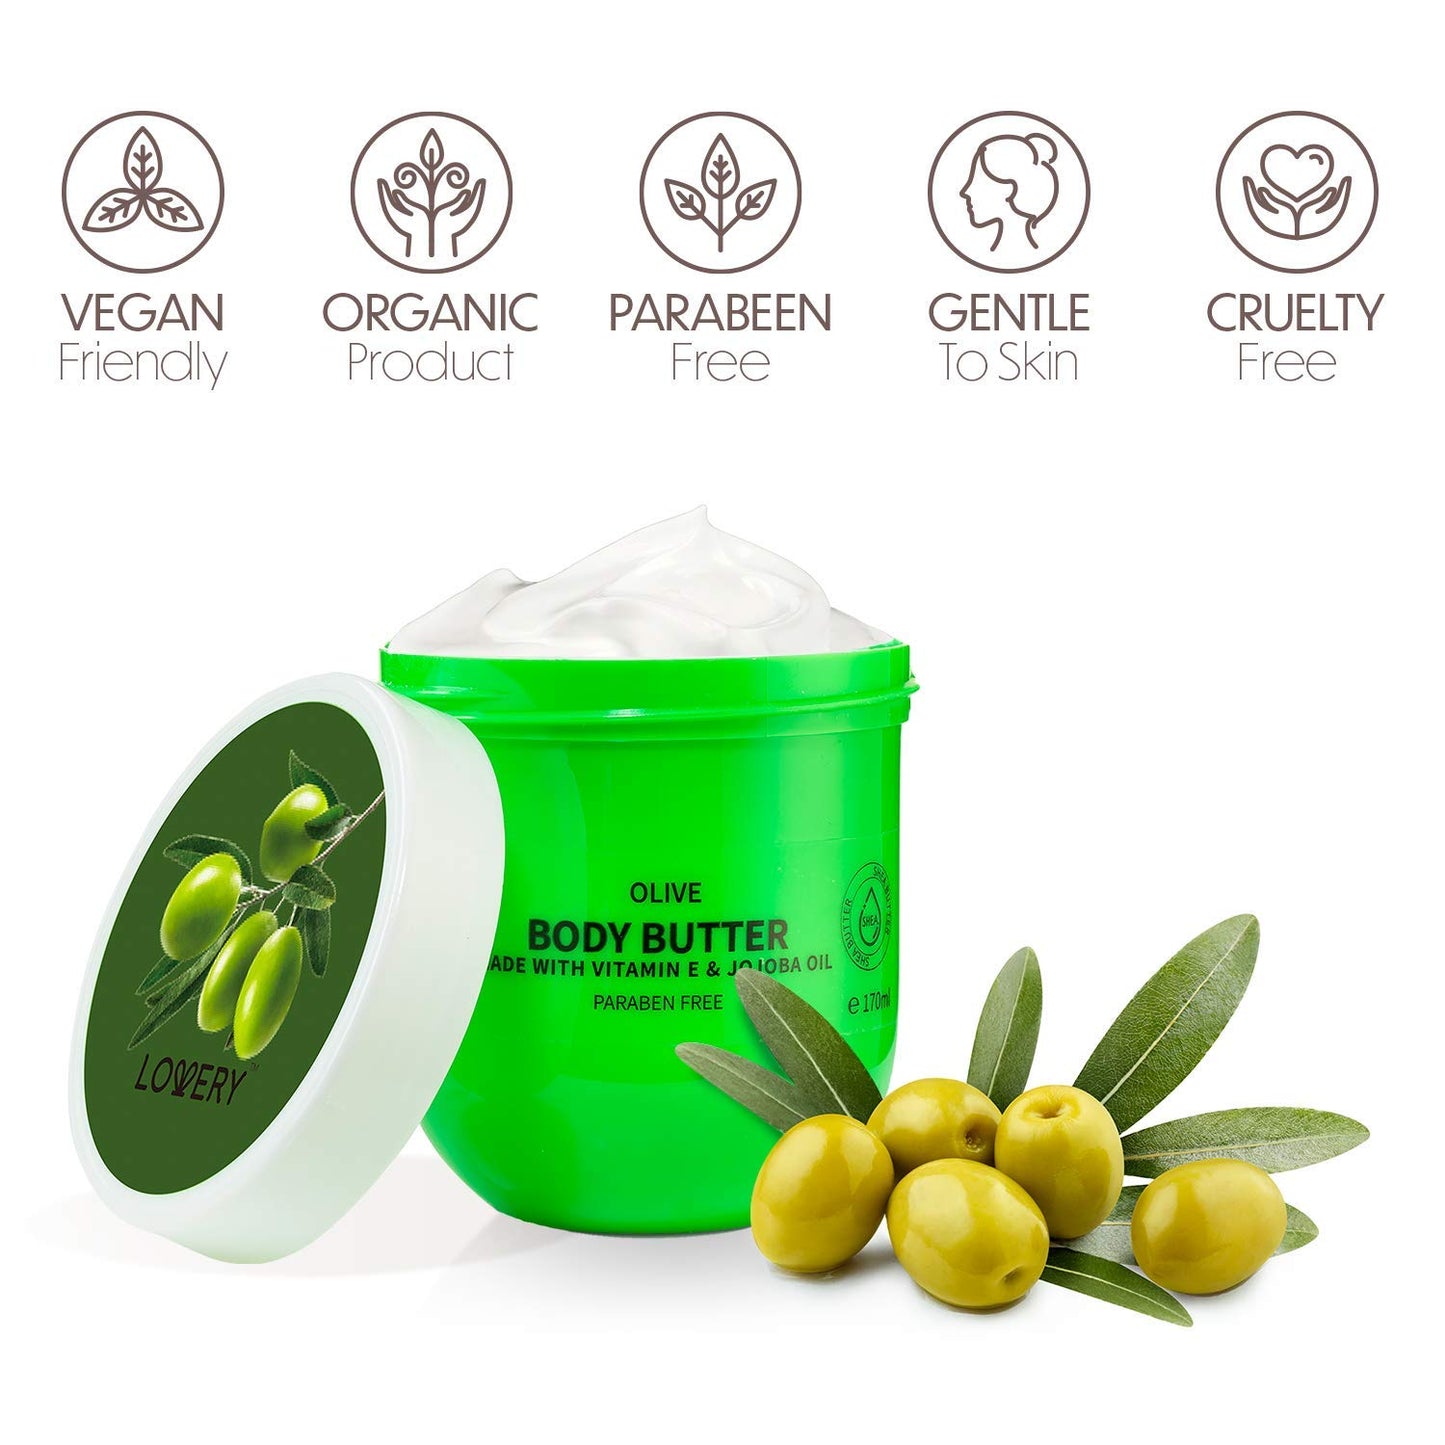 Olive Body Butter - 6oz Whipped Cream